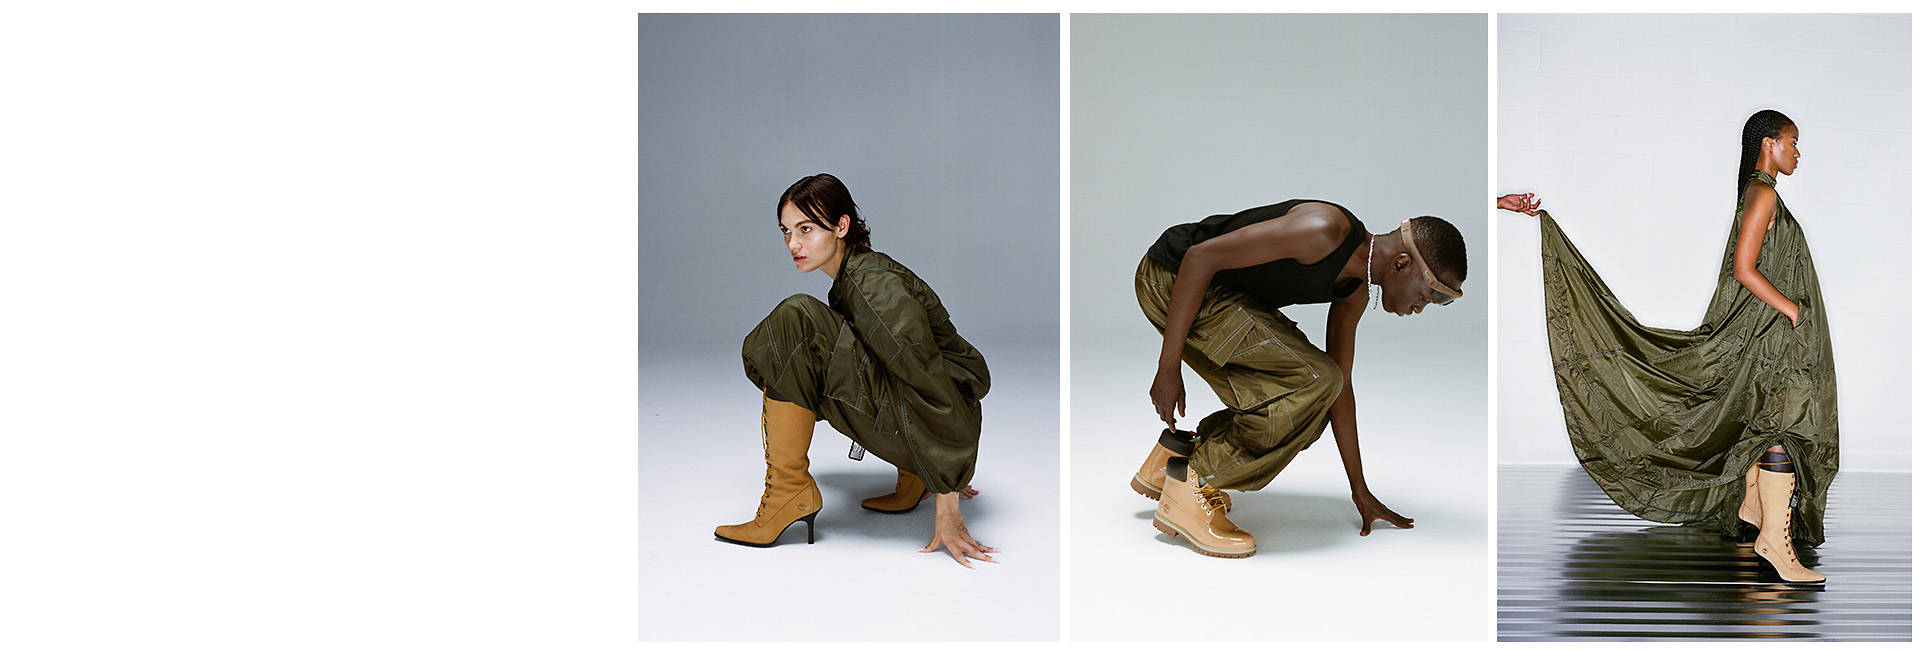 Image of women and men in tan Timberland boots with olive green and black clothing.